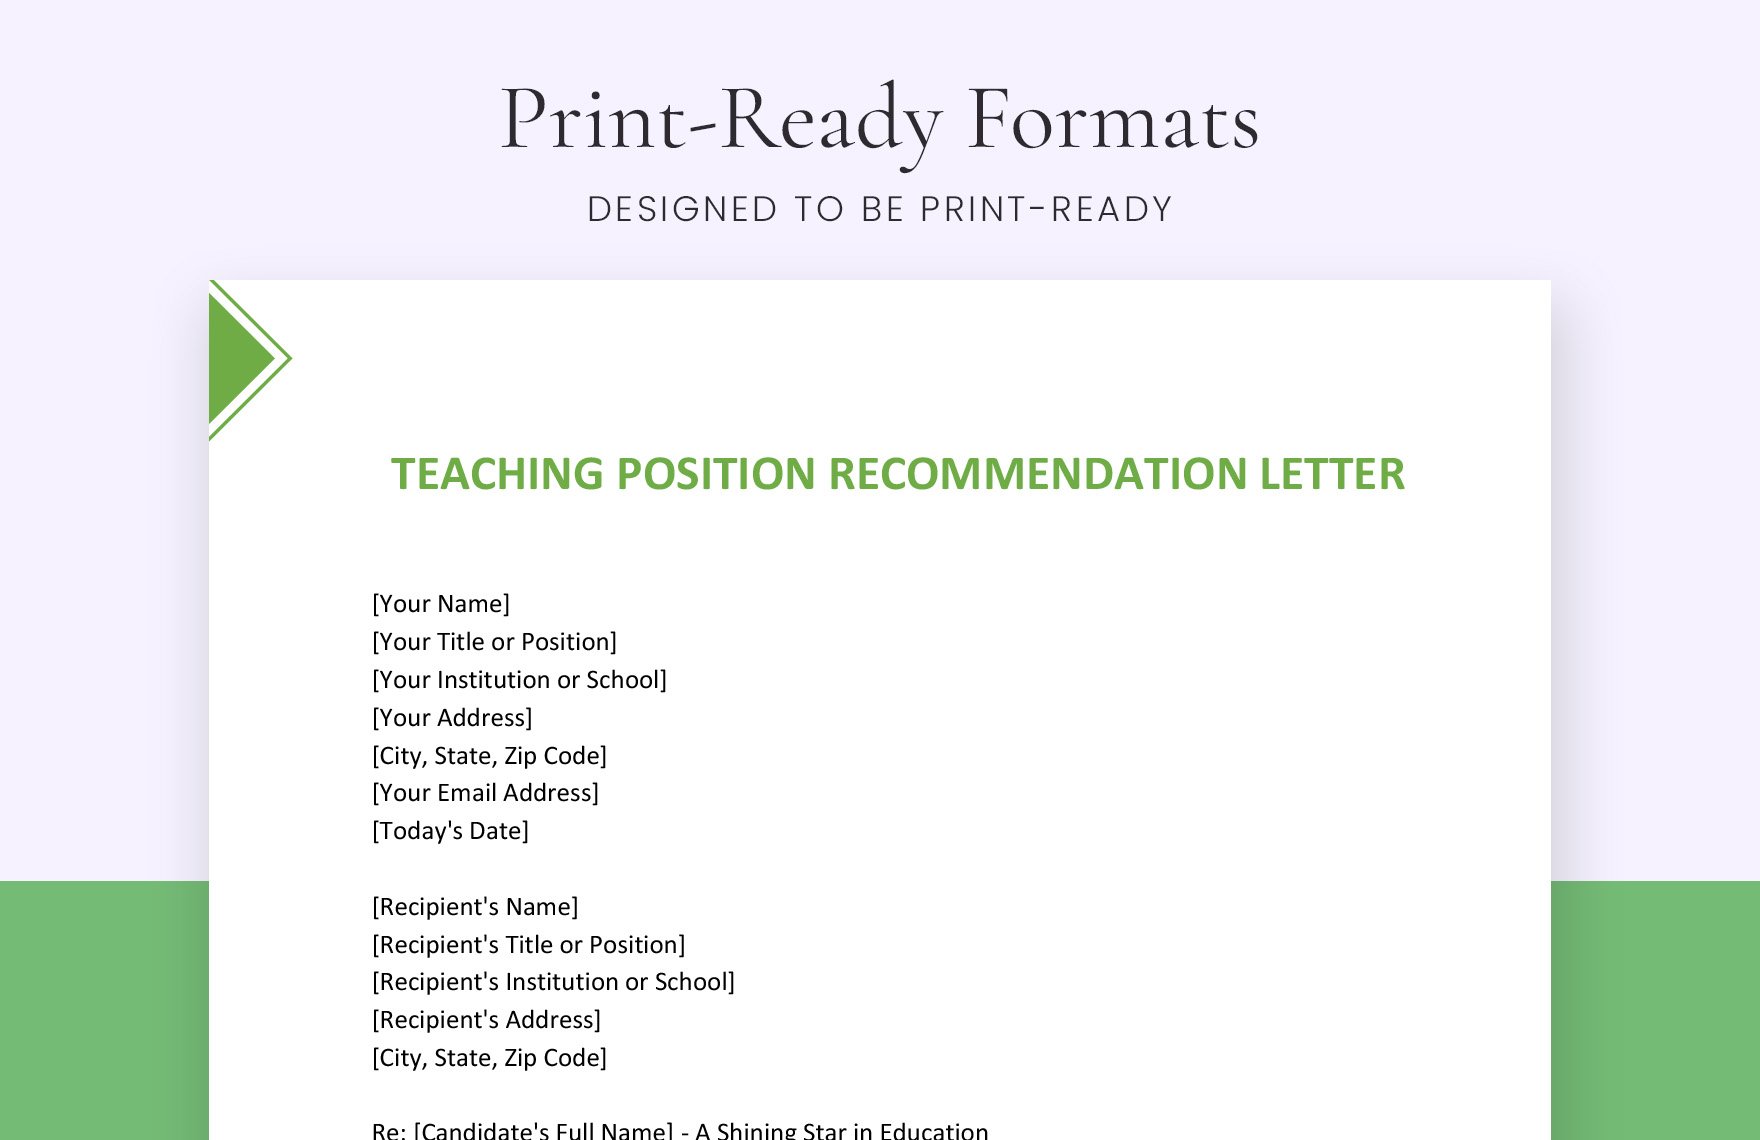 Teaching Position Recommendation Letter